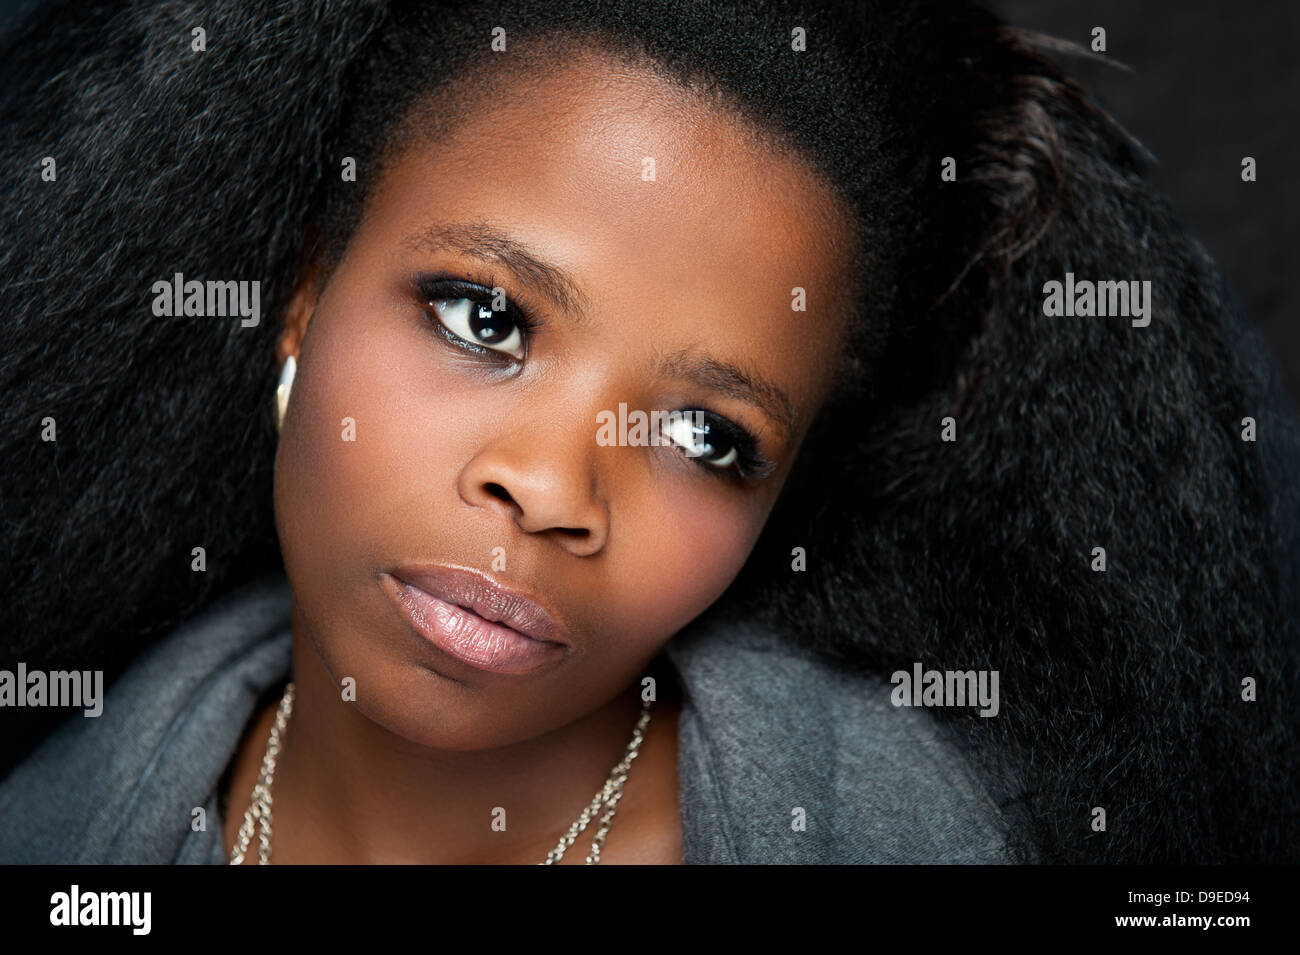 Young African lady with beautiful afro hair and gray coat, a low key background studio shot. Dramatic facial expression. Stock Photo